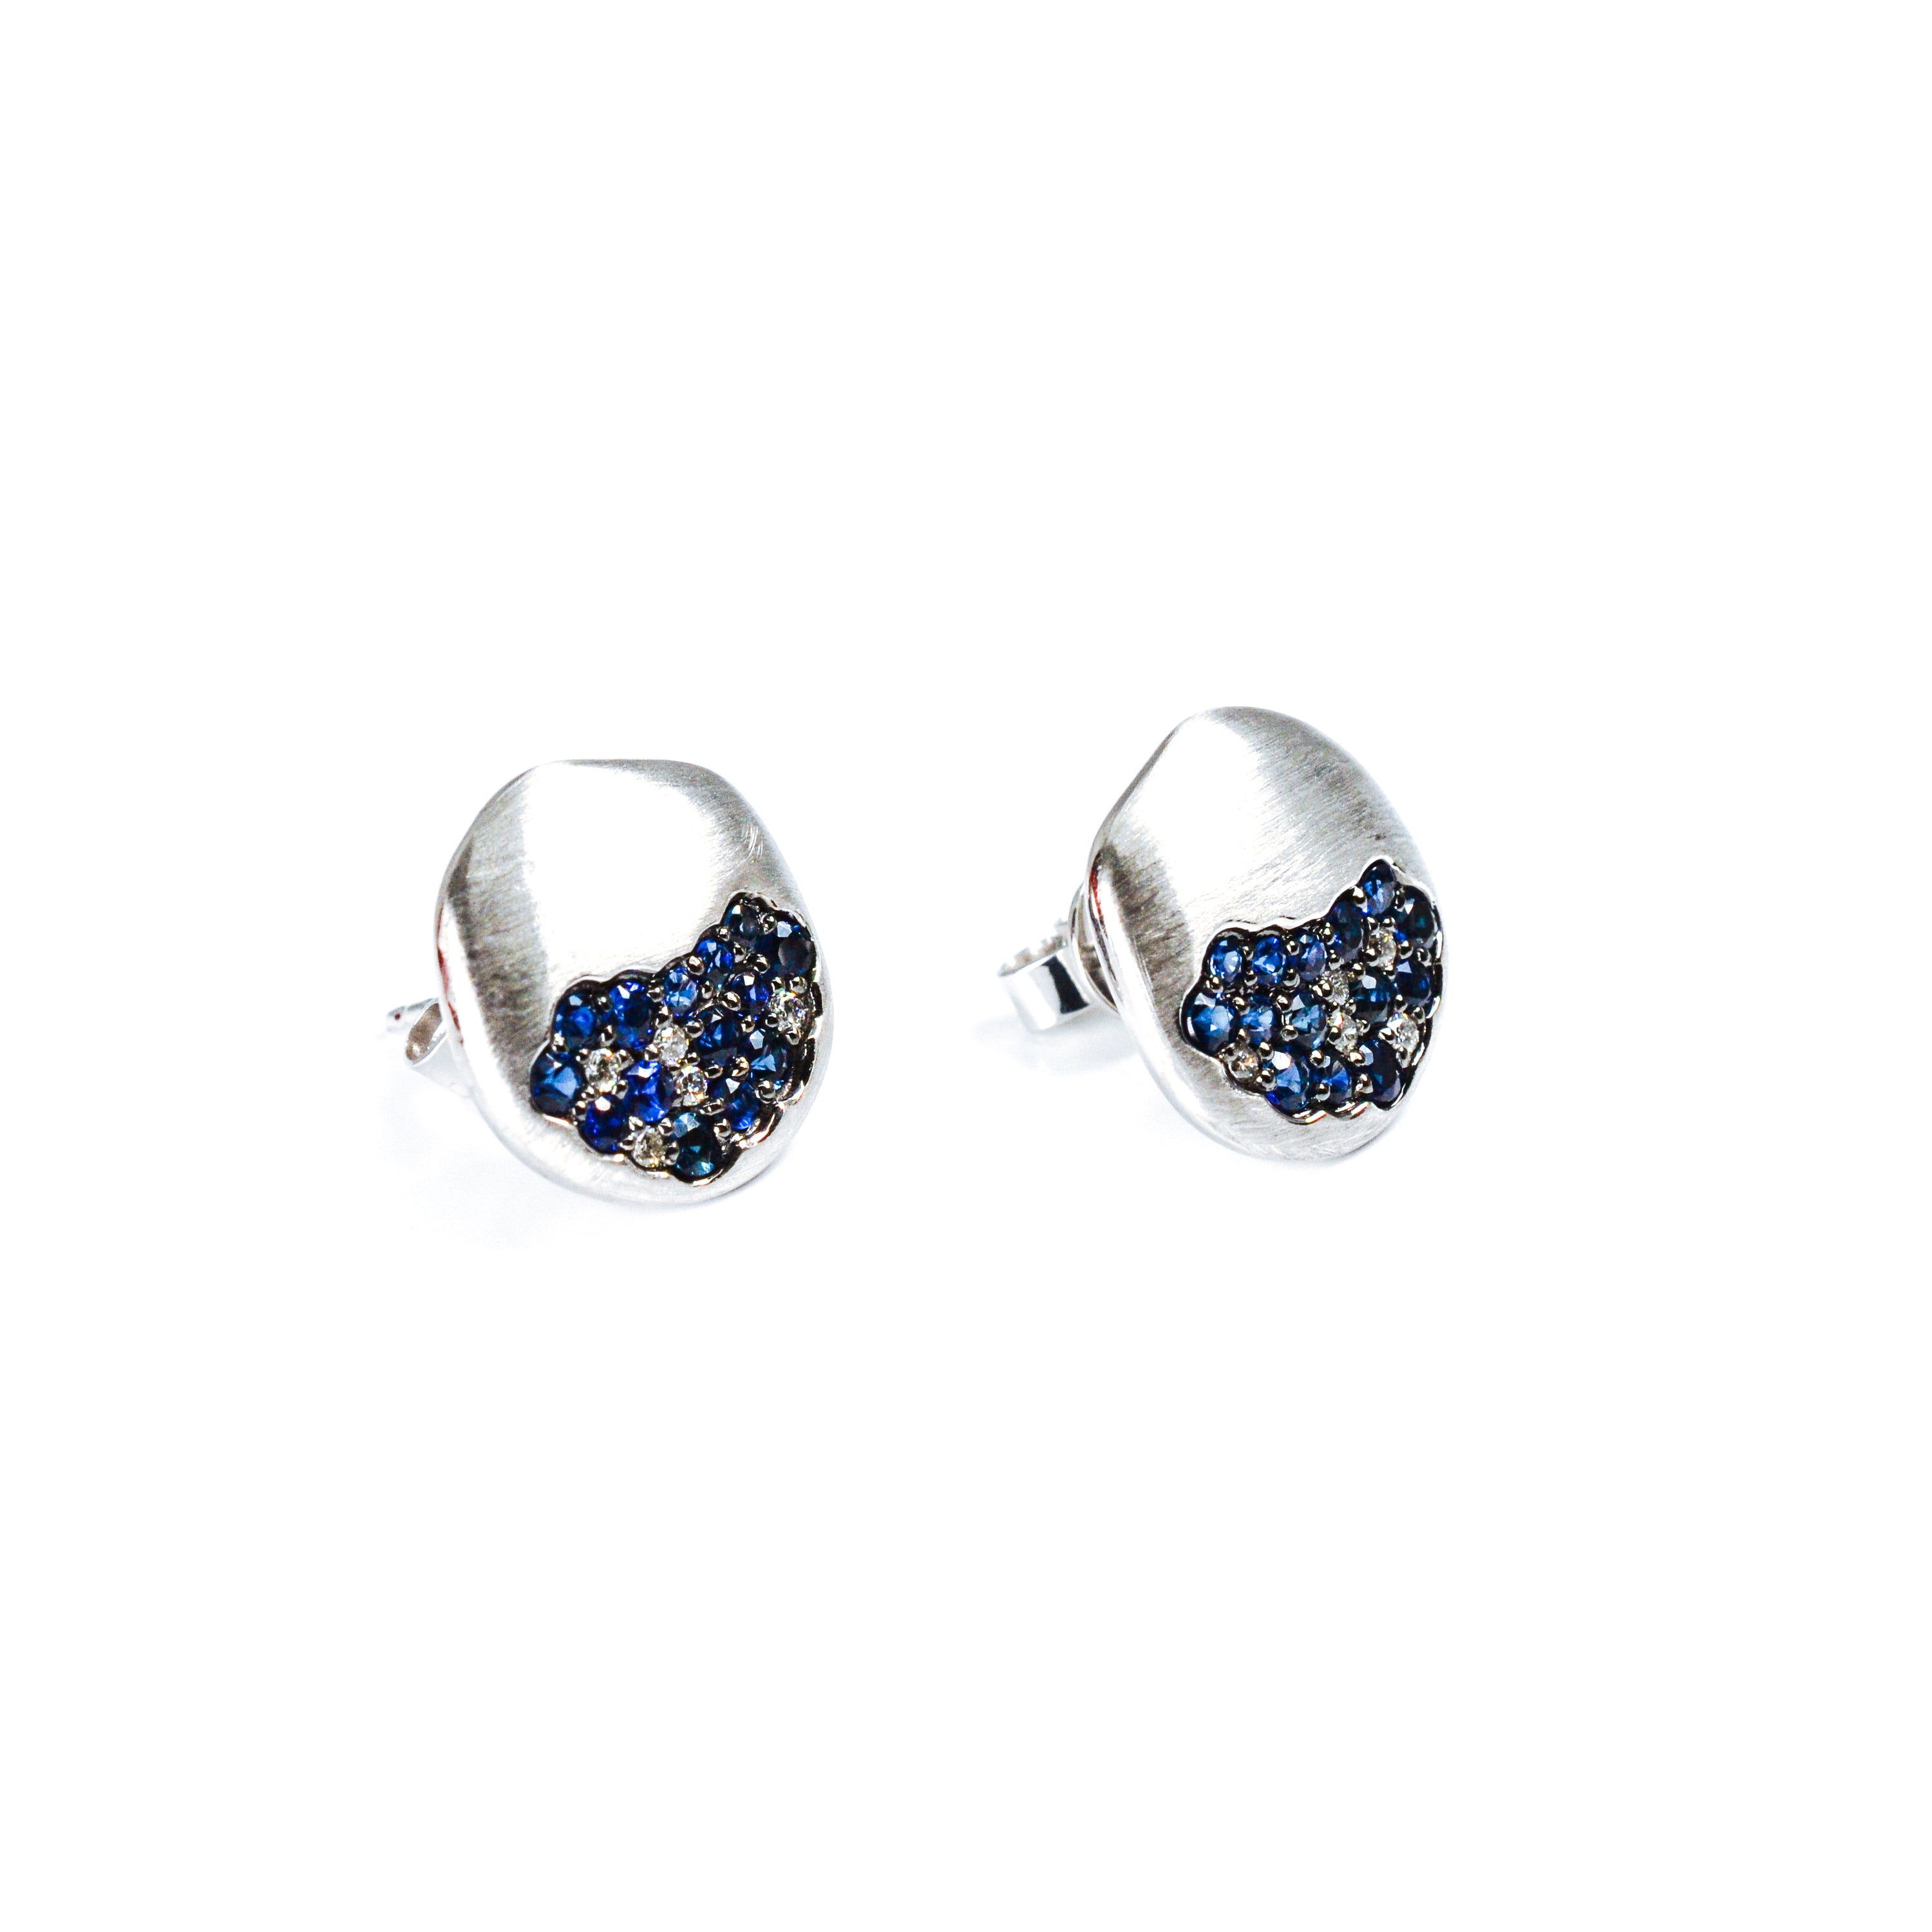 14kt White Gold Diamond and Sapphire Freeform Earrings